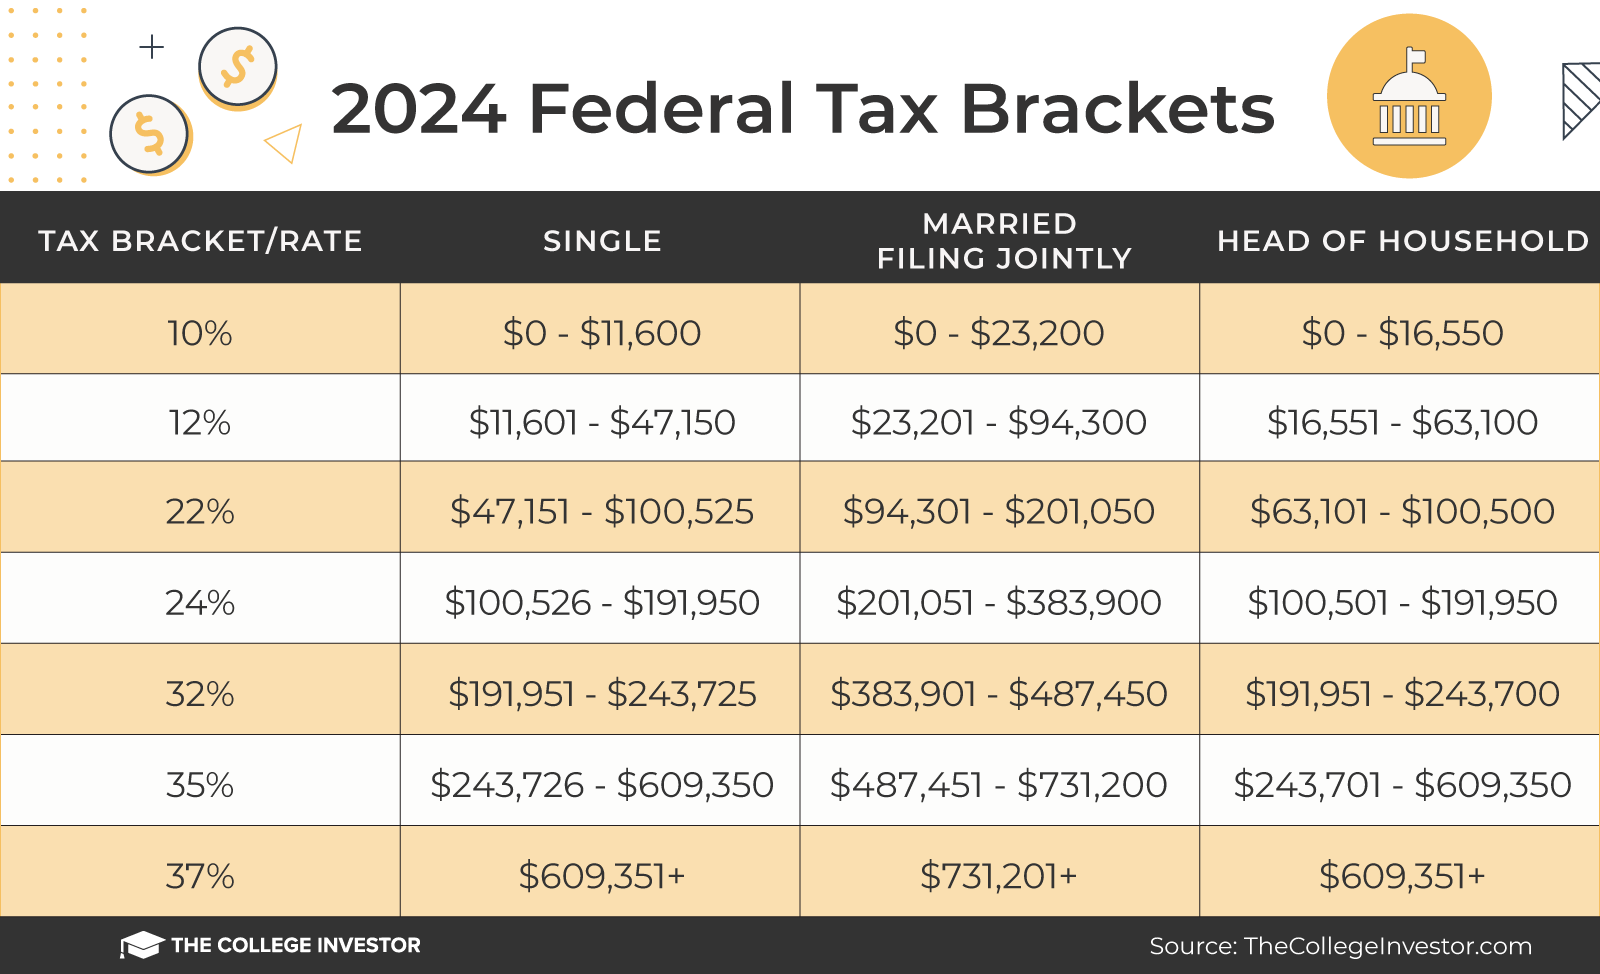 FICA Tax: 4 Steps to Calculating FICA Tax in 2023